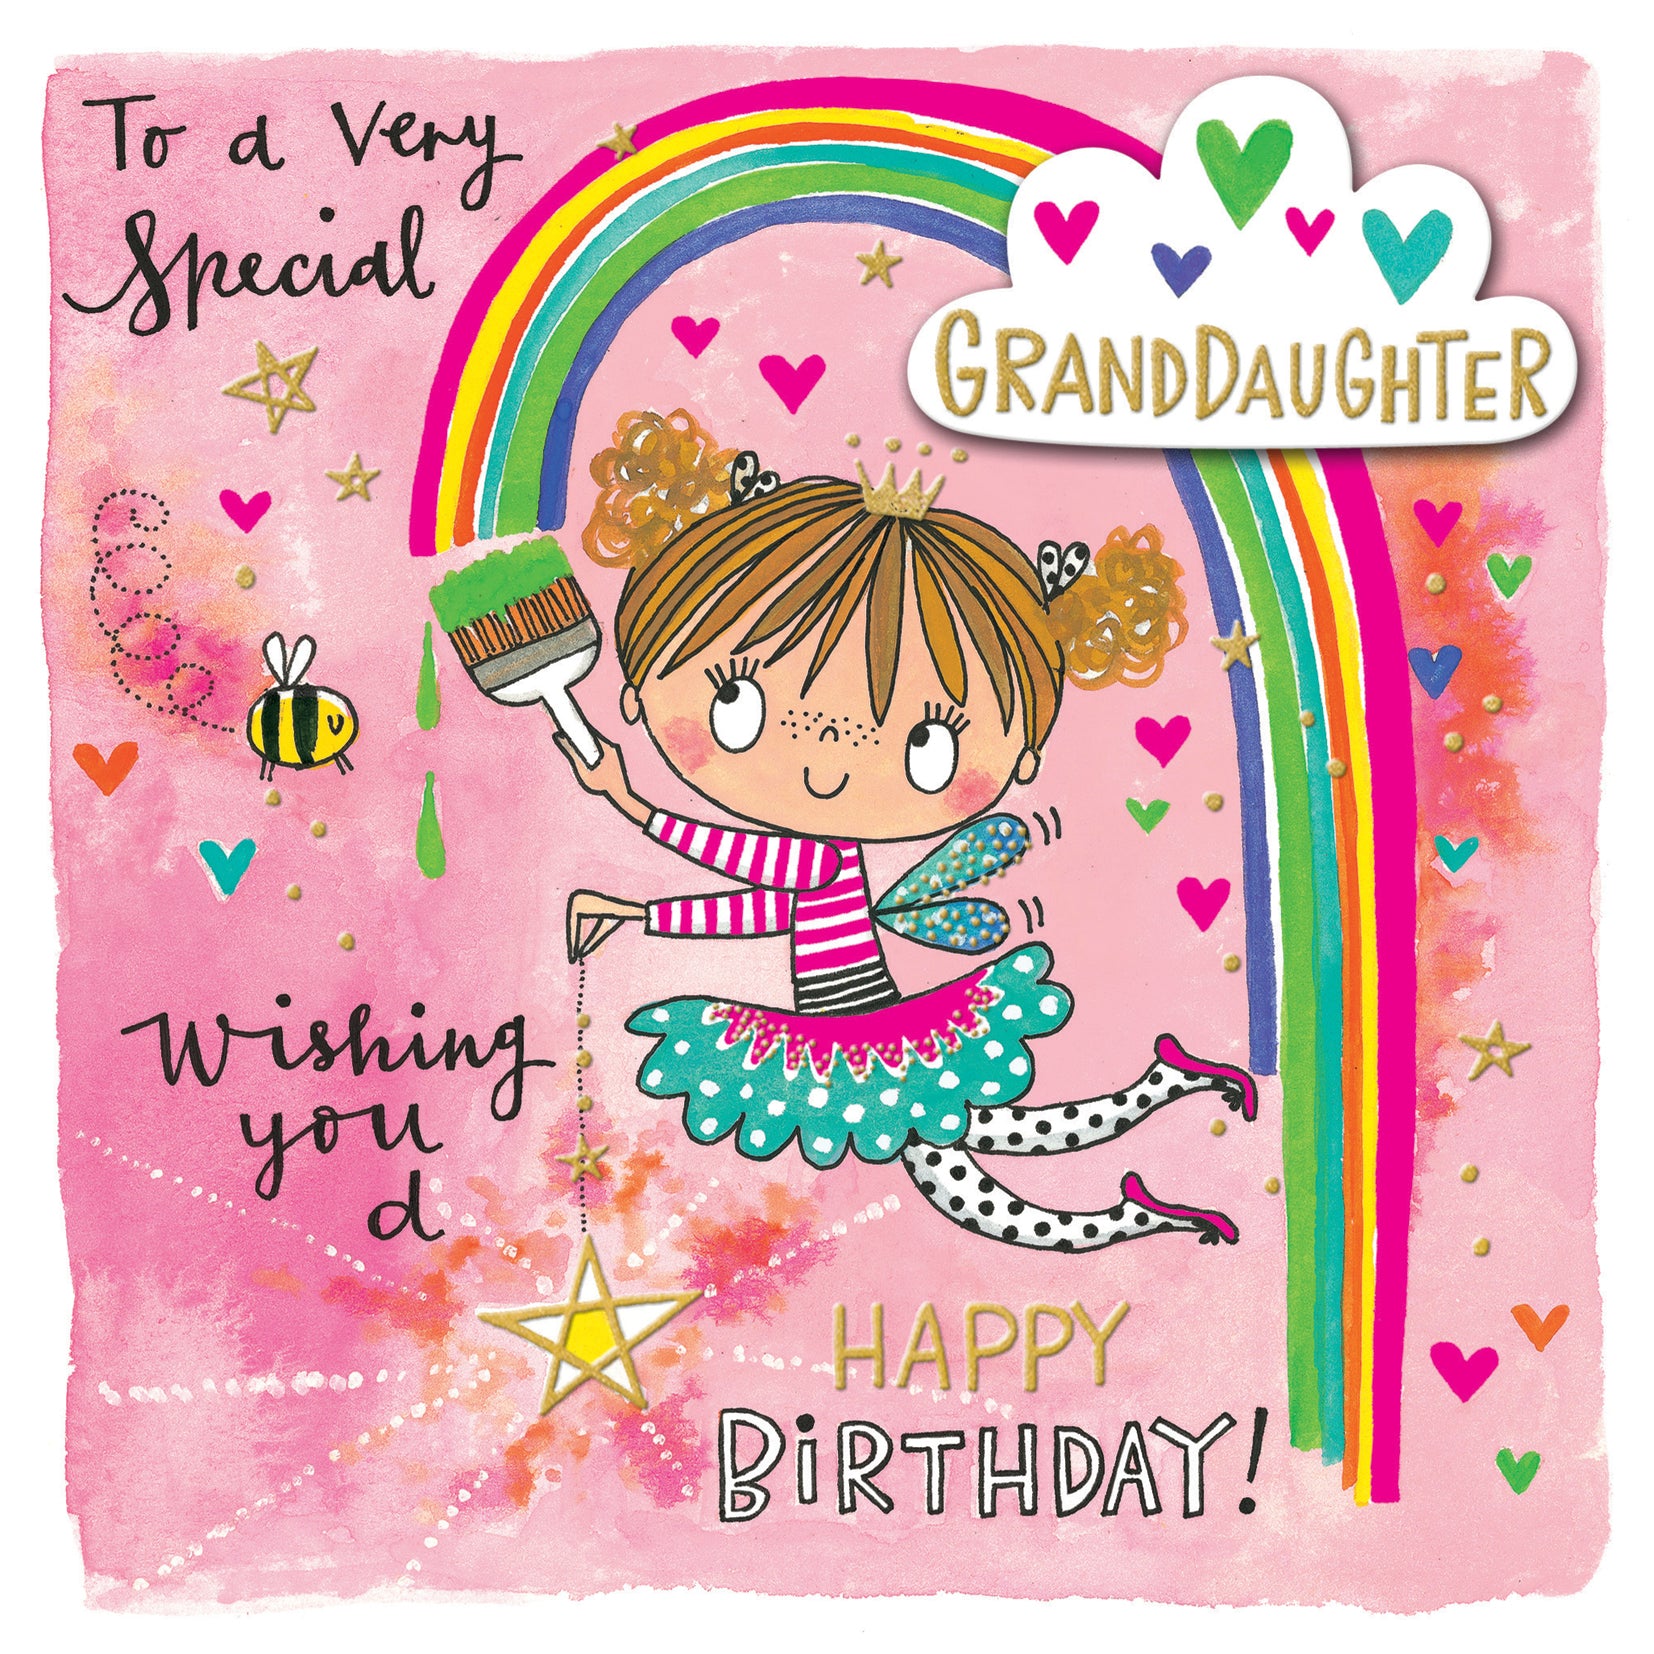 Rainbow Painting Granddaughter Birthday Card from Penny Black